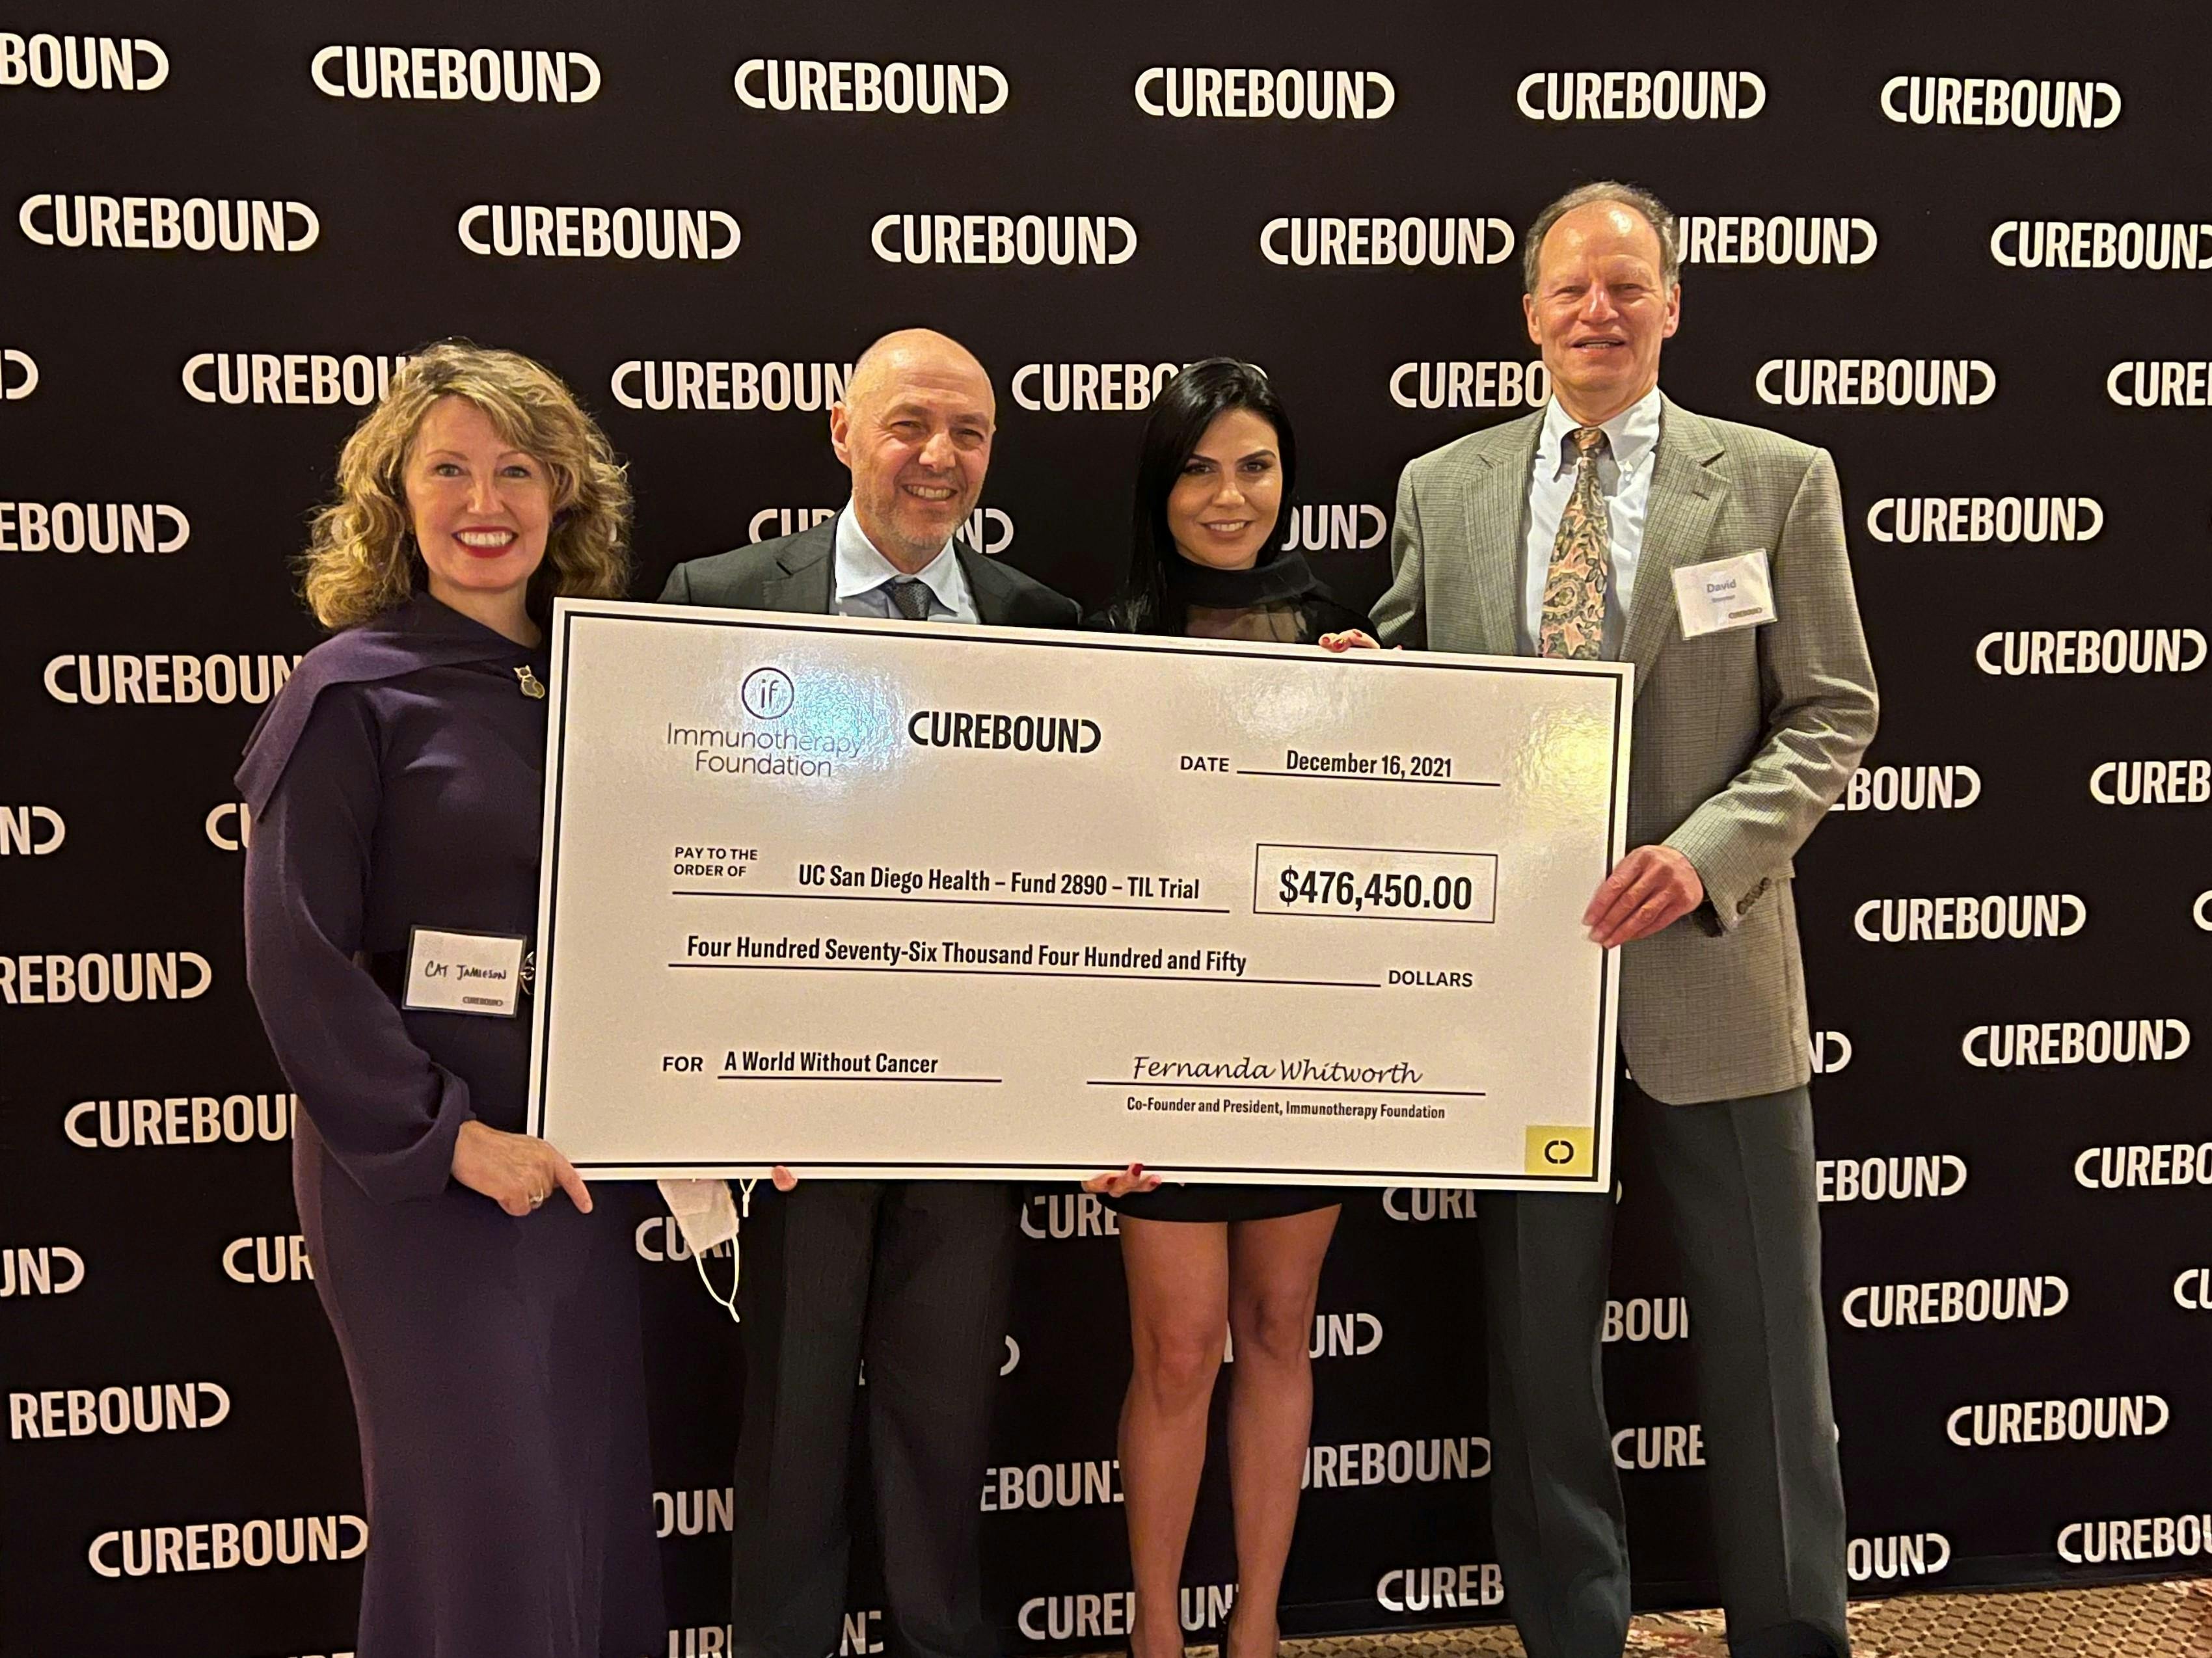 Curebound Donates More than $476,000 for Cancer Immunotherapy Clinical Trial undefined